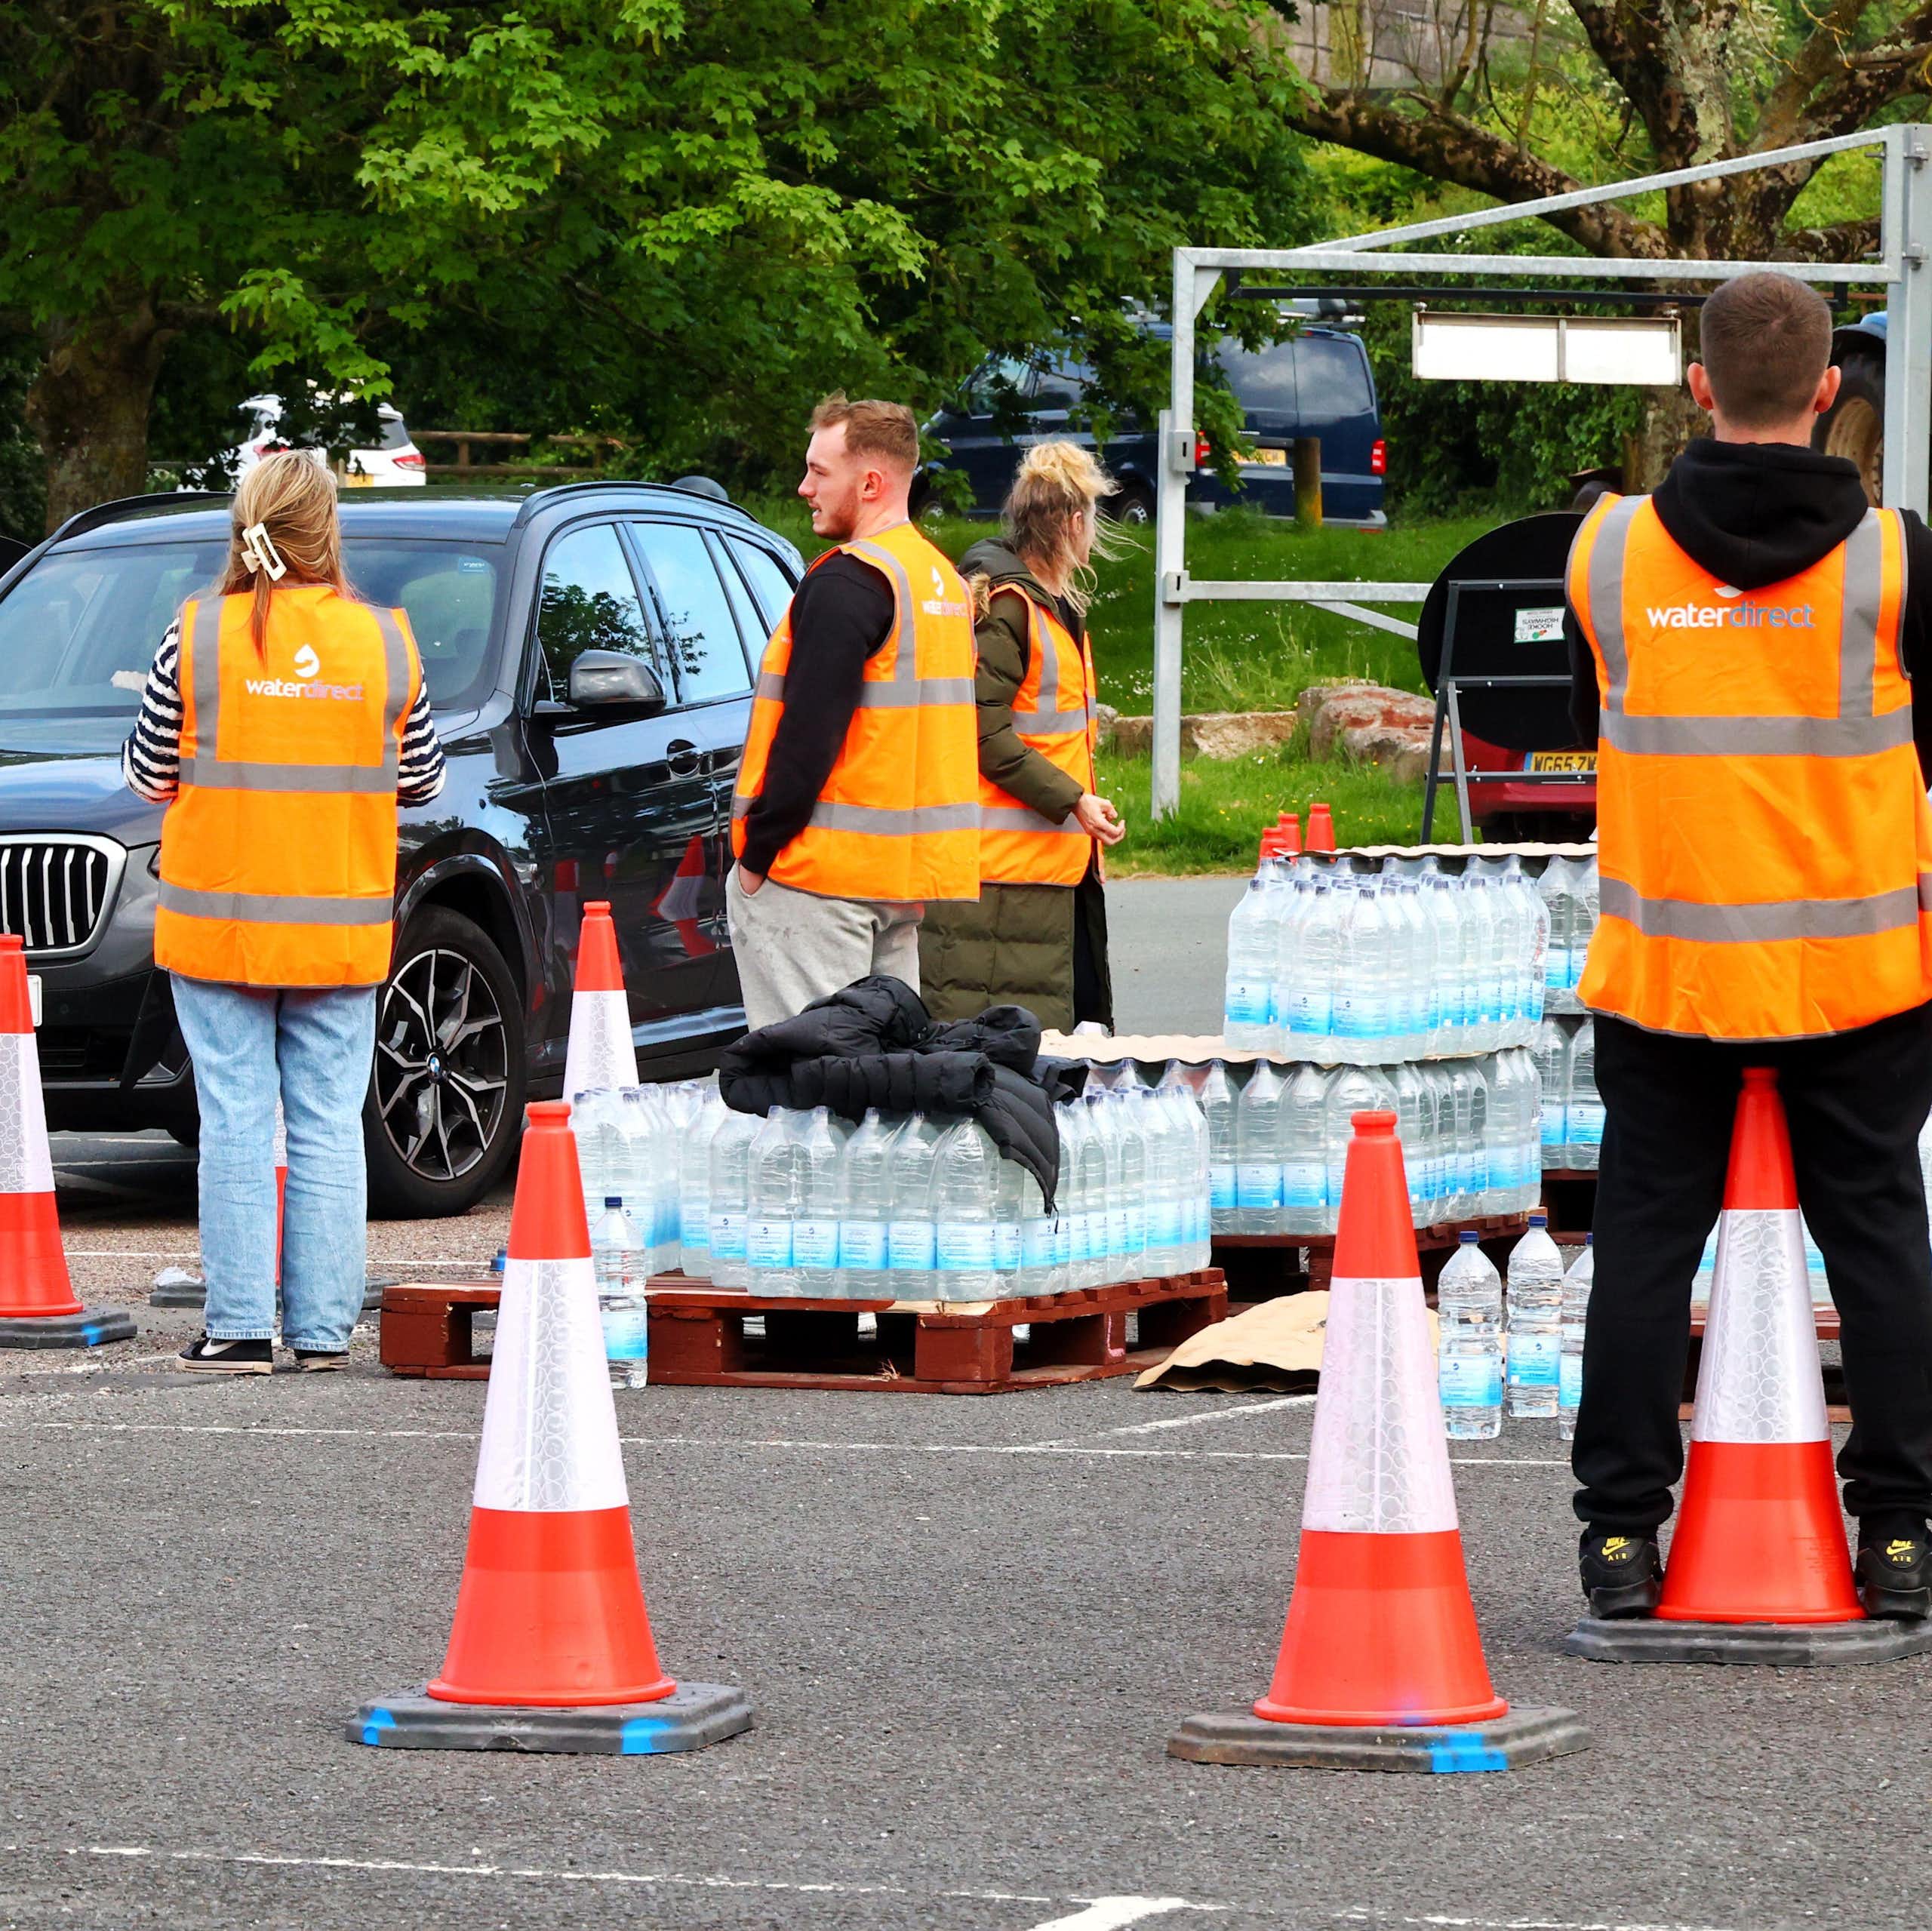 South West Water handing out emergency rations of bottled water to anyone affected by the Cryptosporidium outbreak in Torbay